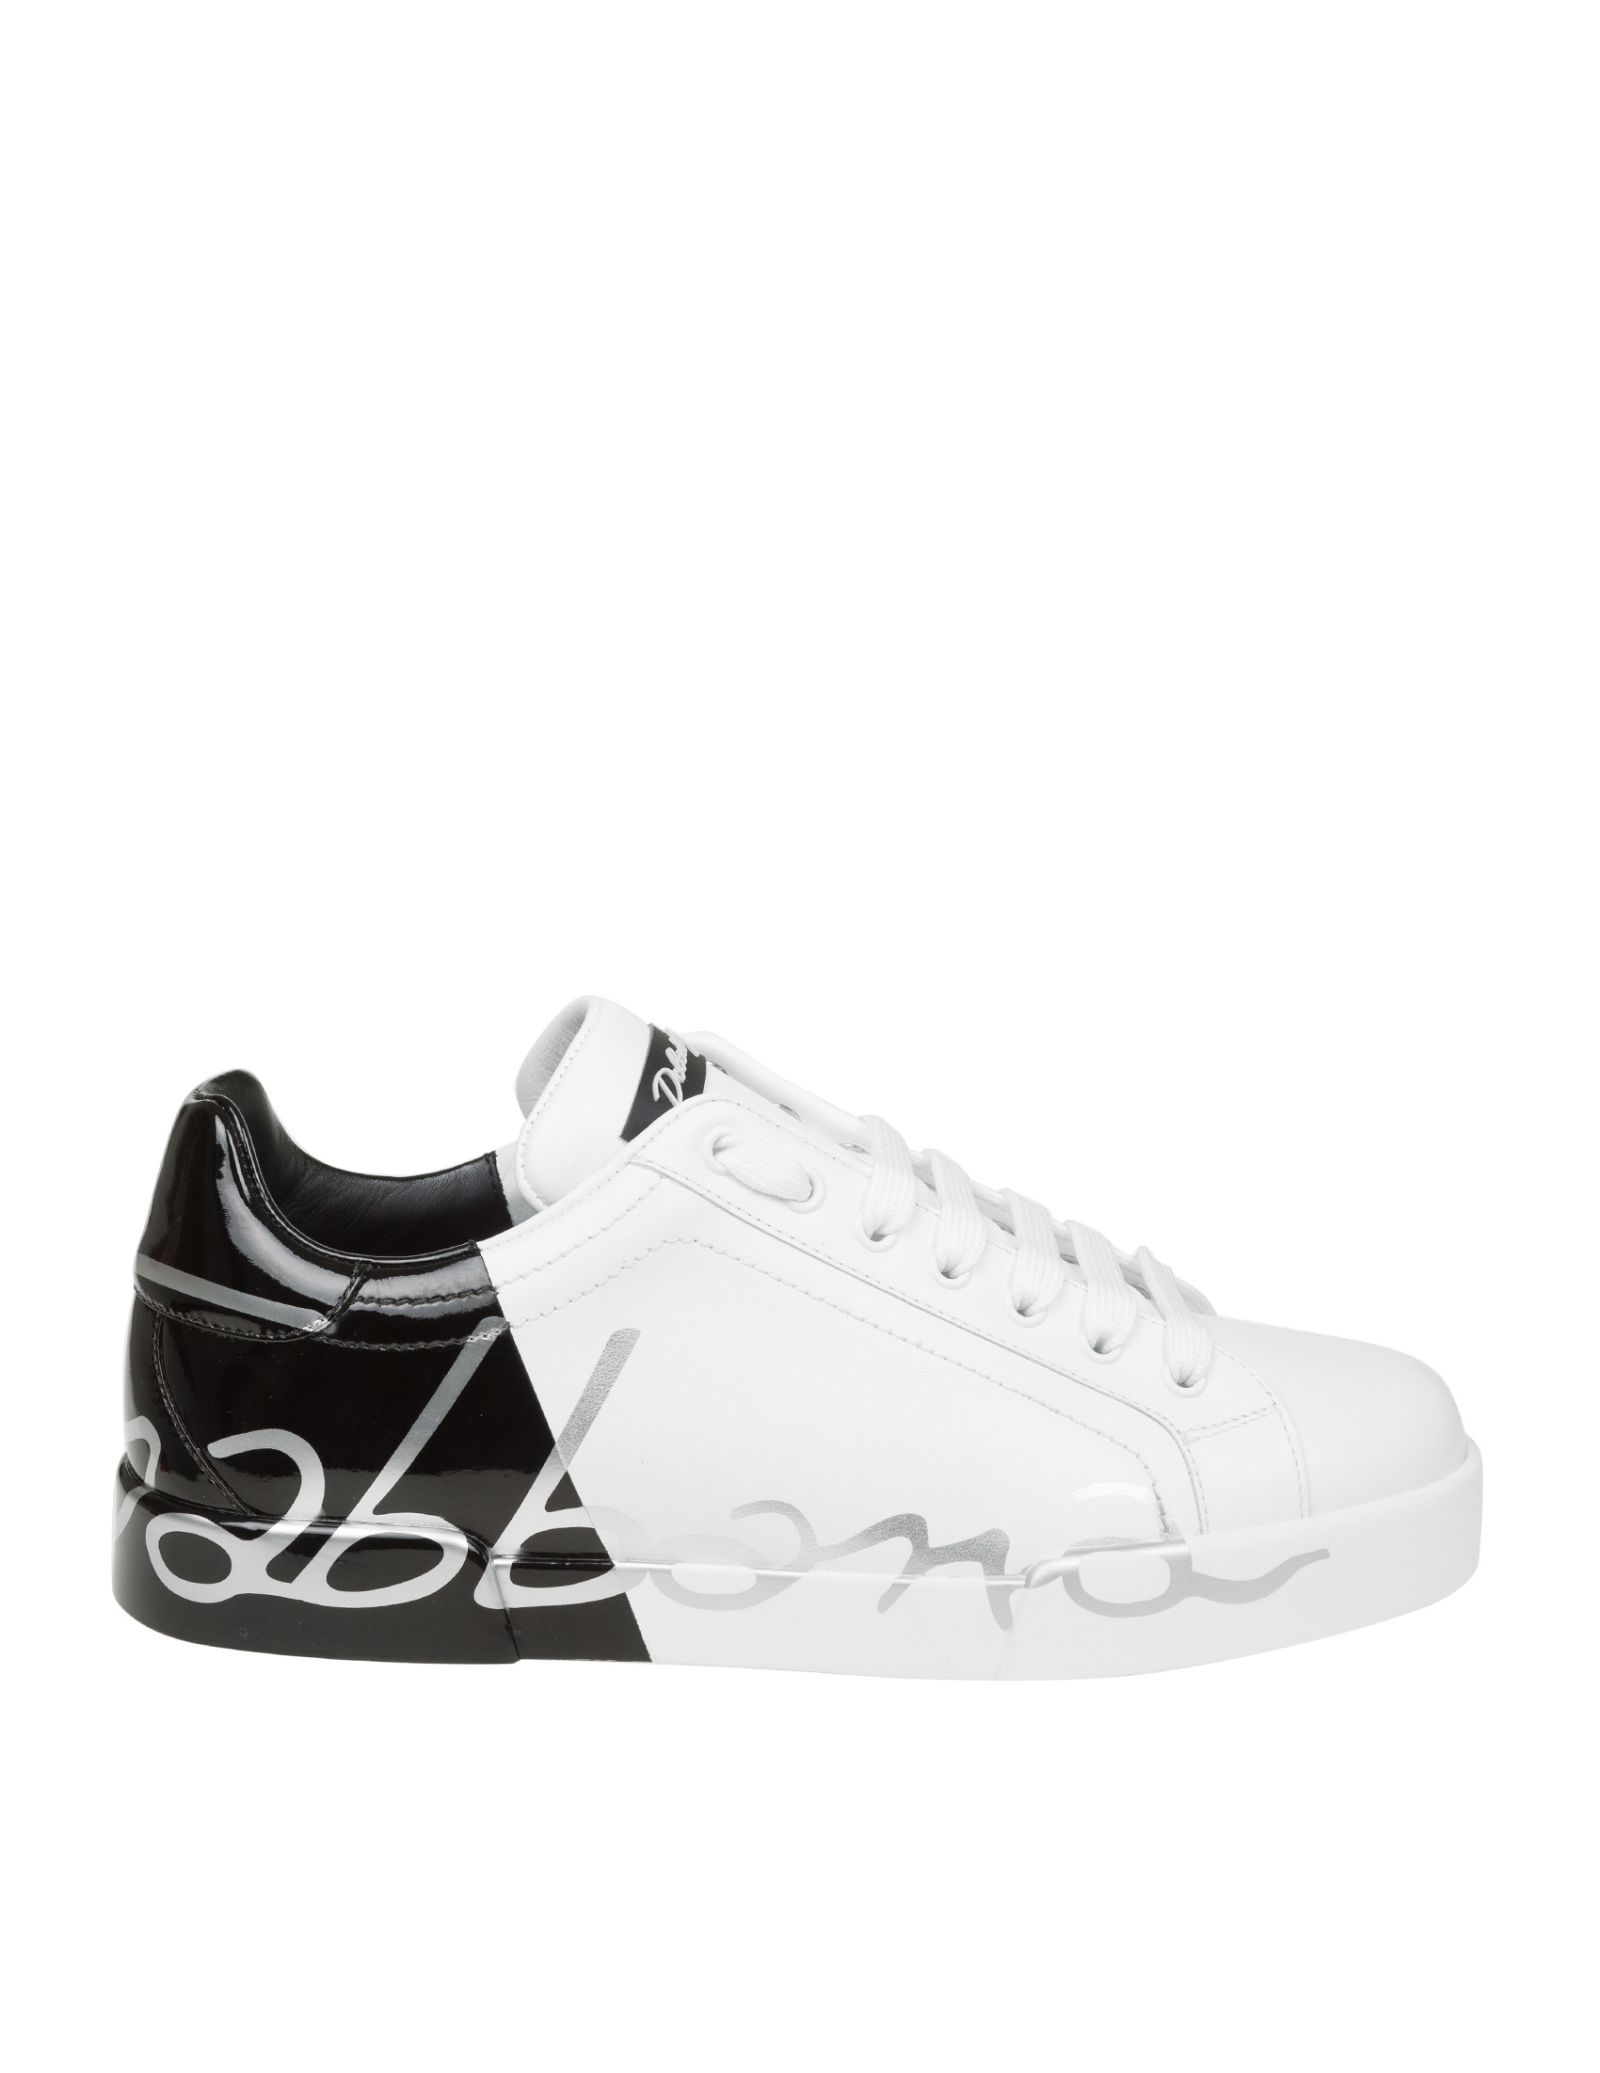 Dolce & Gabbana Dolce & Gabbana Sneakers In Black And White Leather ...